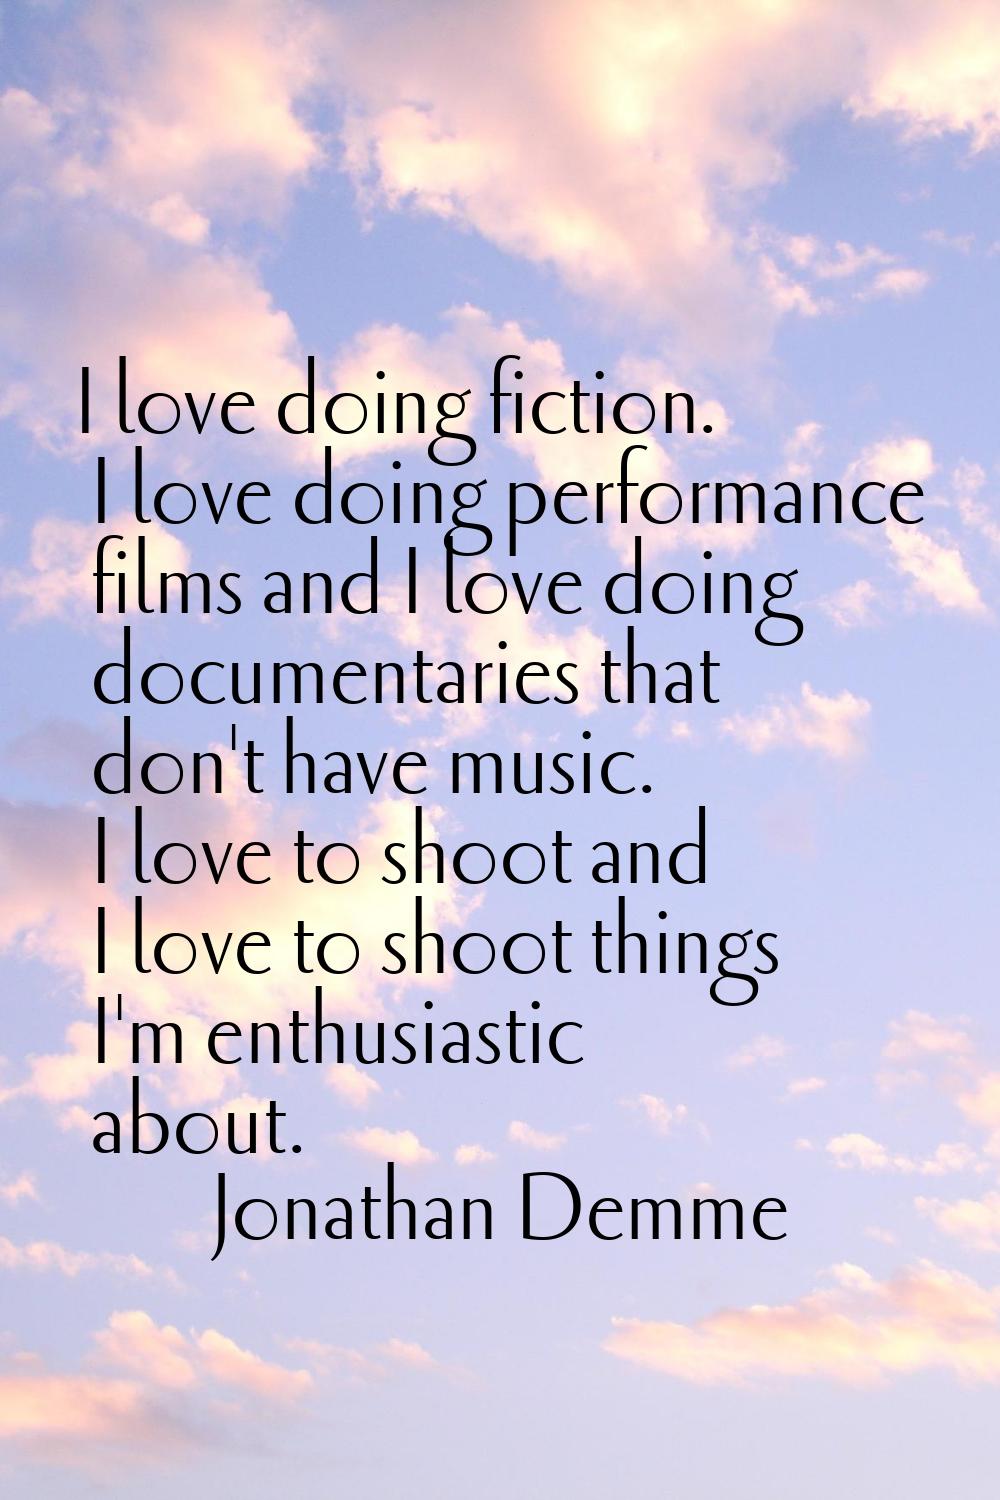 I love doing fiction. I love doing performance films and I love doing documentaries that don't have